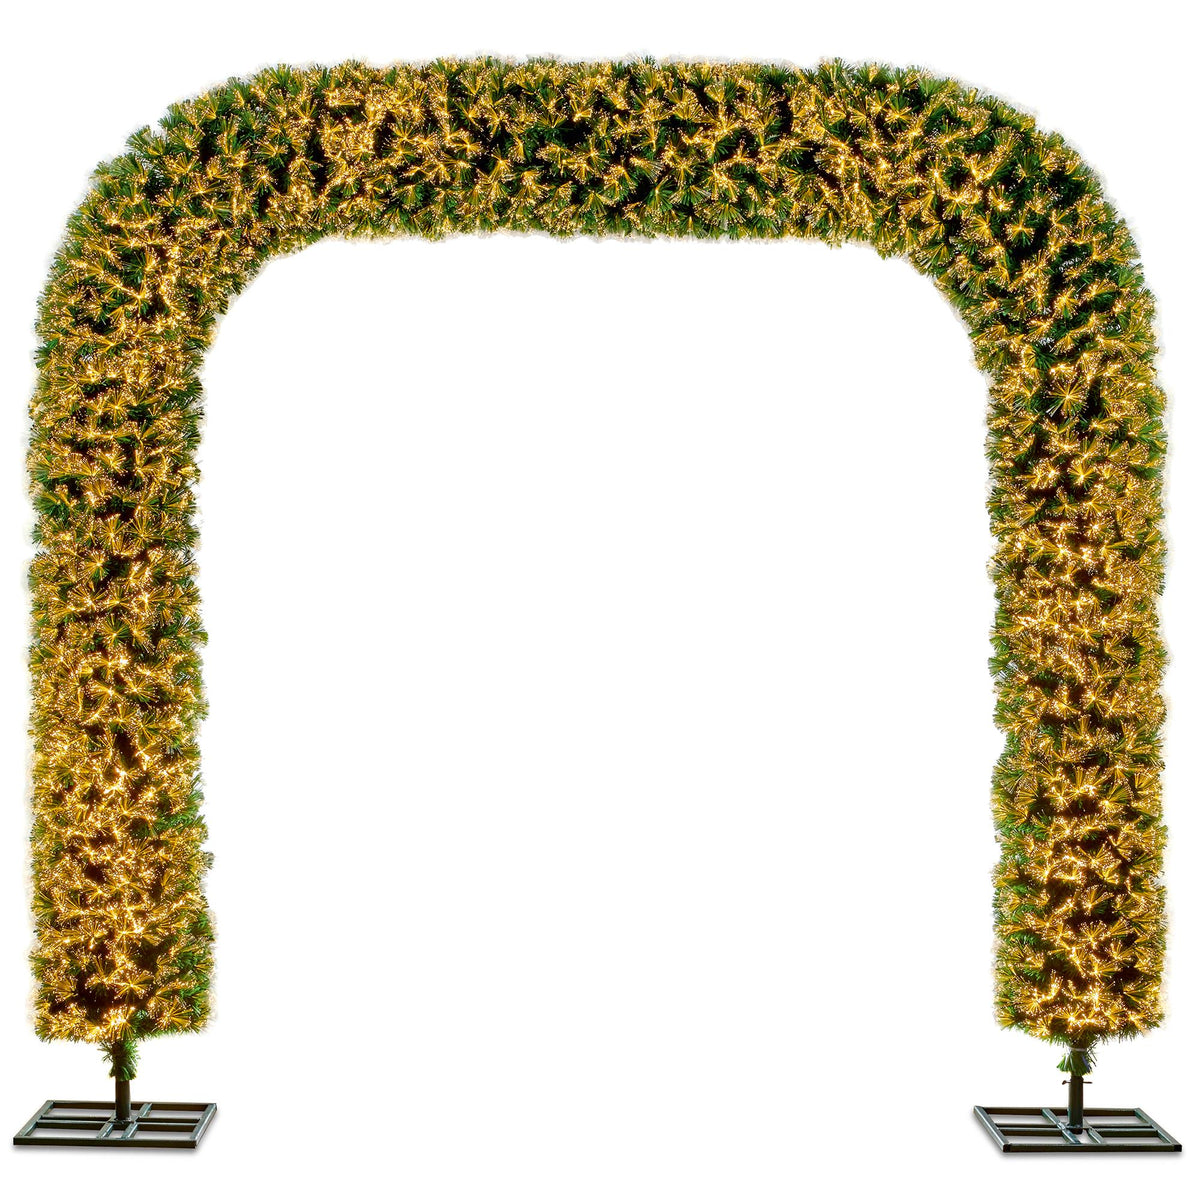 2.7m Giant Warm White Shimmering Christmas Arch Way with Metal Stands